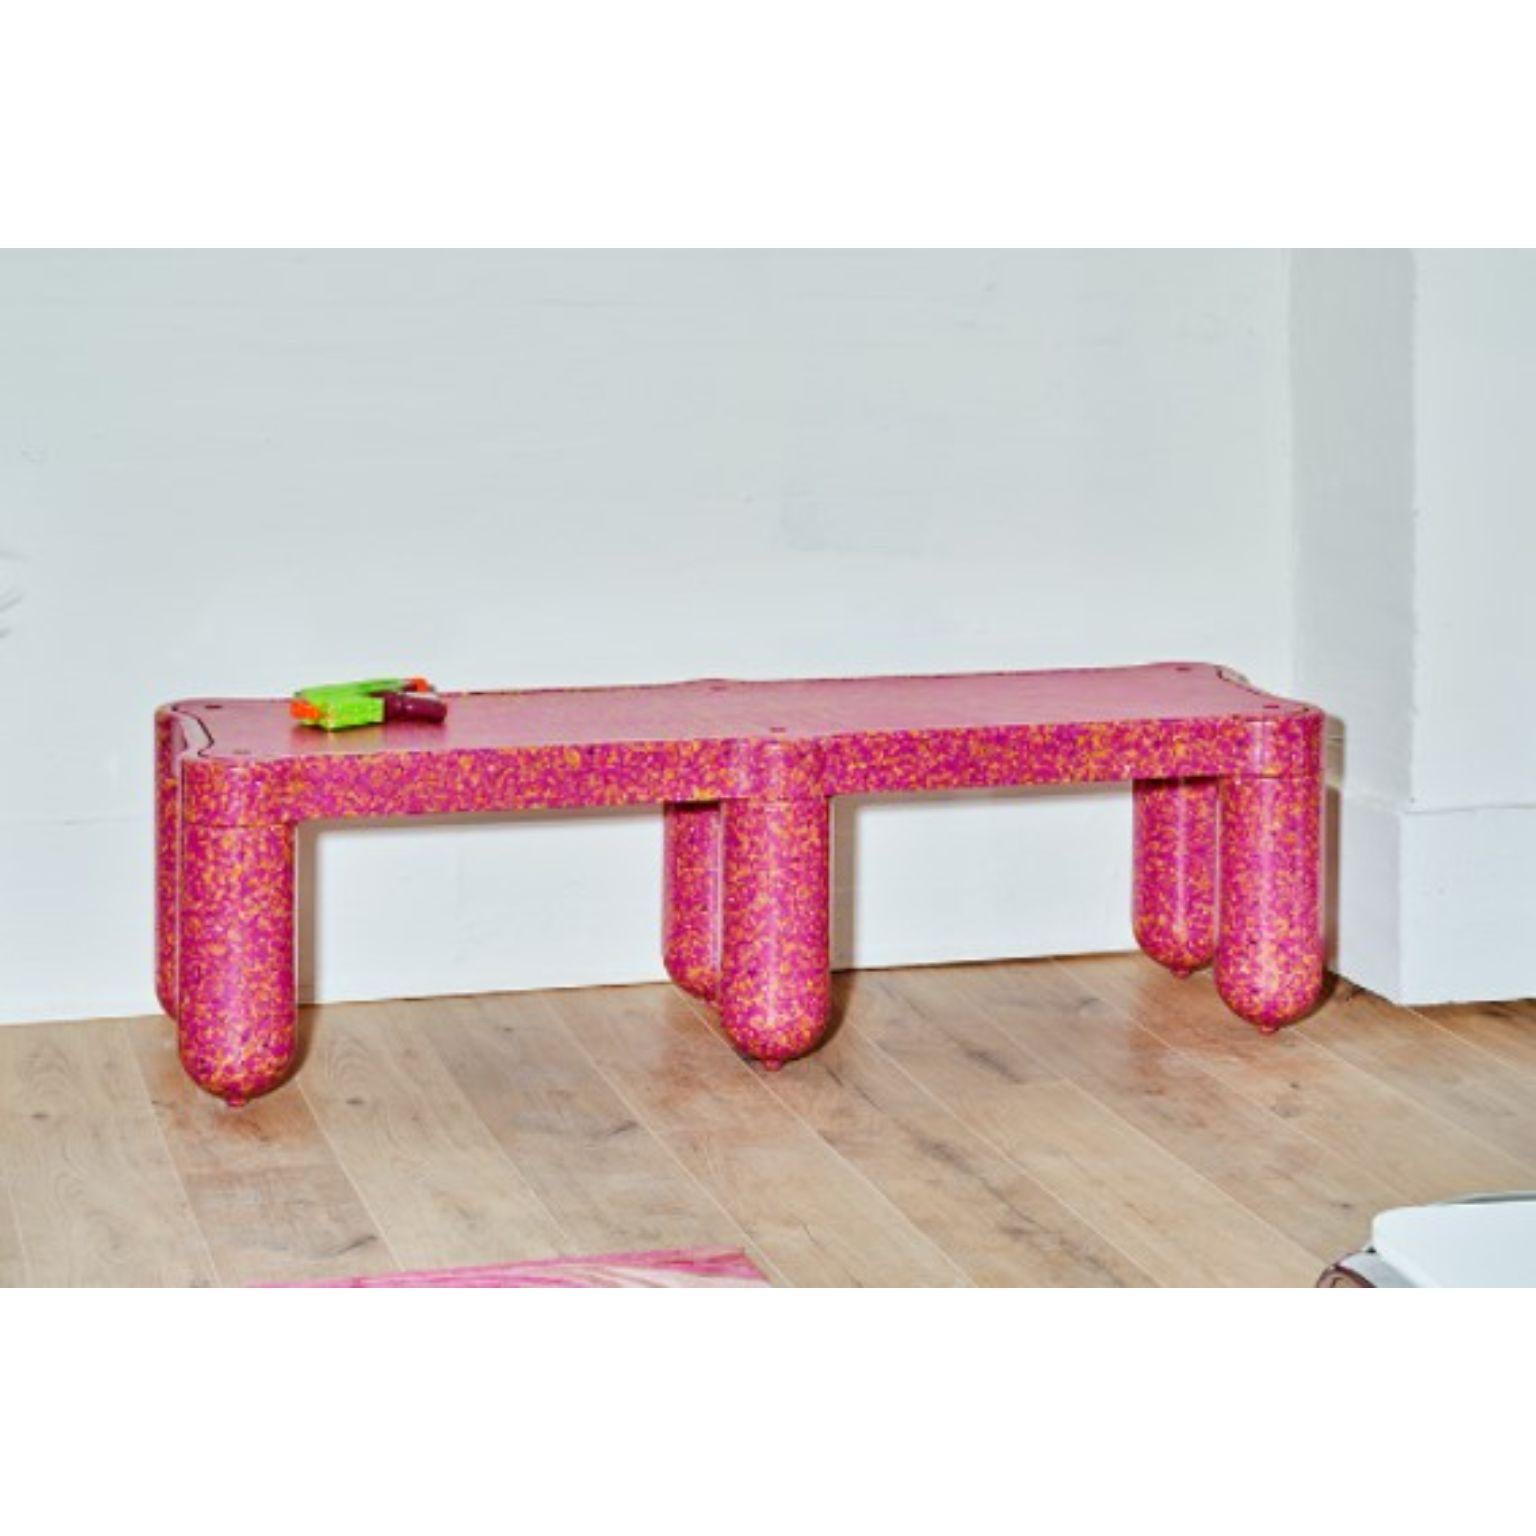 Pink bench by Supernovas
Dimensions: D150 x W40 x H12 cm
Materials: 50% Recycled LDPE + 50% Virgin Plastic 
Weight: 22 kg
Also available in different colours.

Easy to assemble without tools, Afterlife Bench takes the weight off your feet or